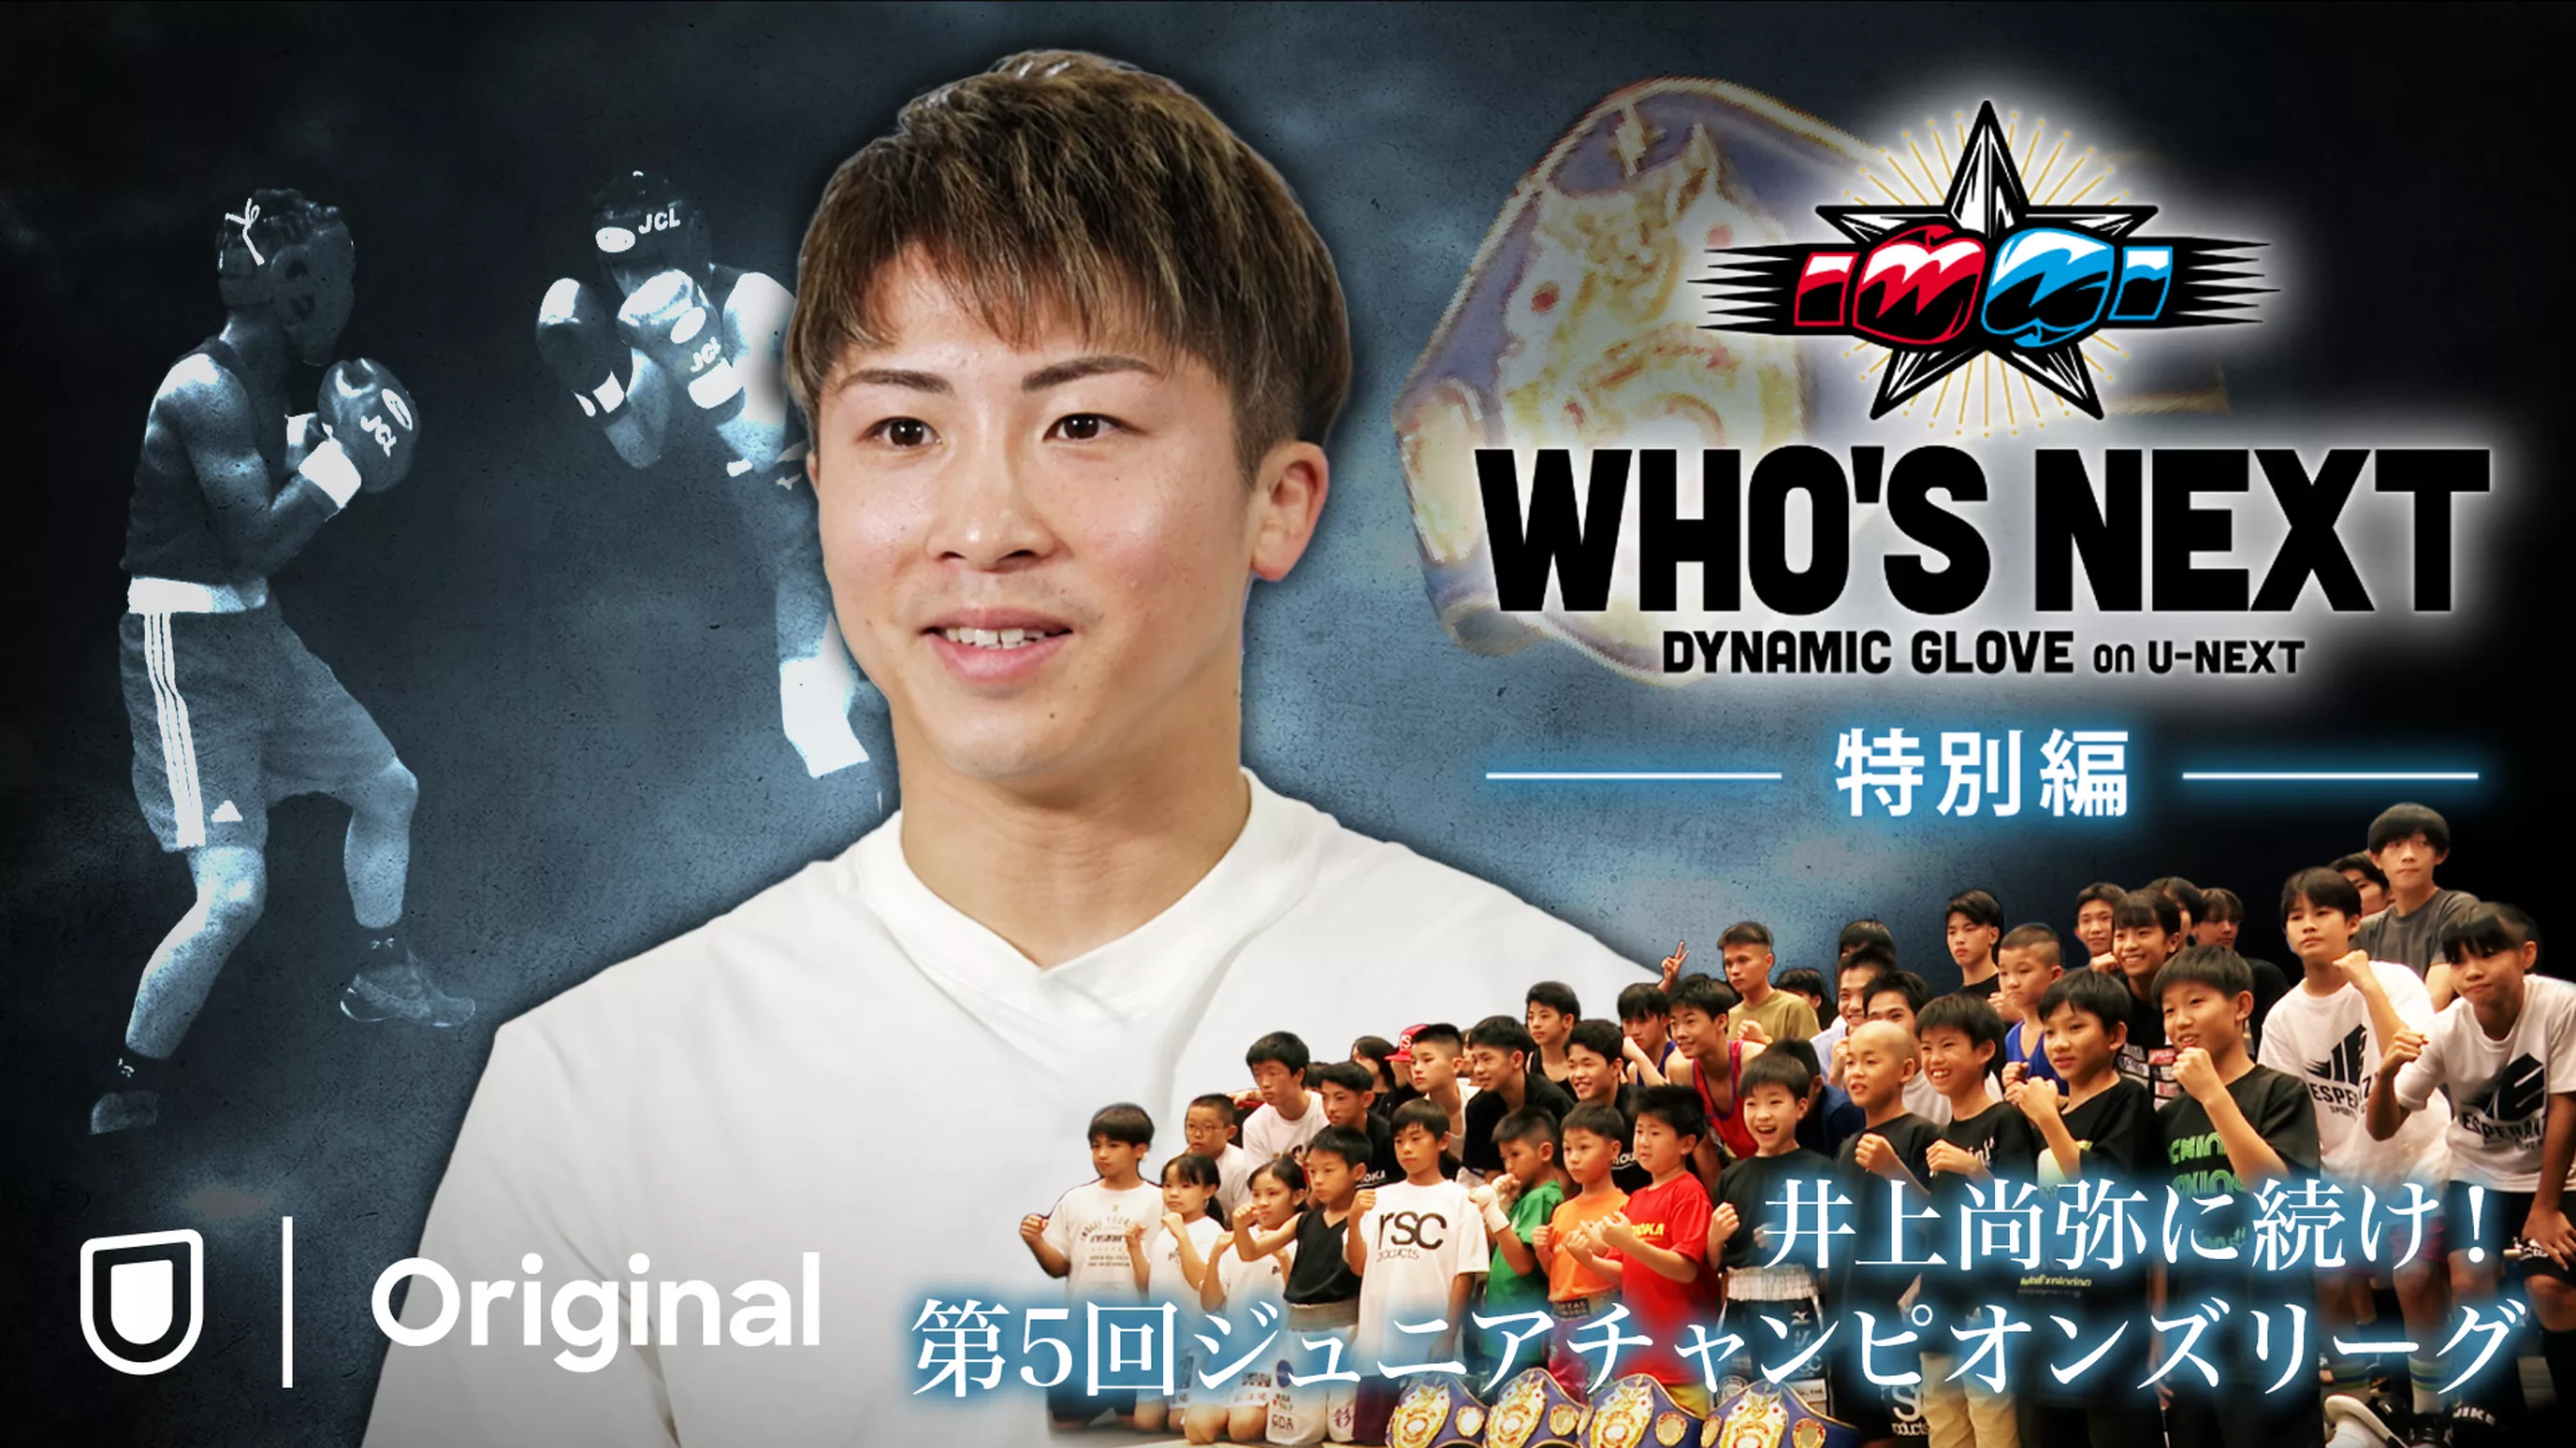 WHO'S NEXT DYNAMIC GLOVE BOXING 特別編「井上尚弥に続け！第5回ジュニアチャンピオンズリーグ」